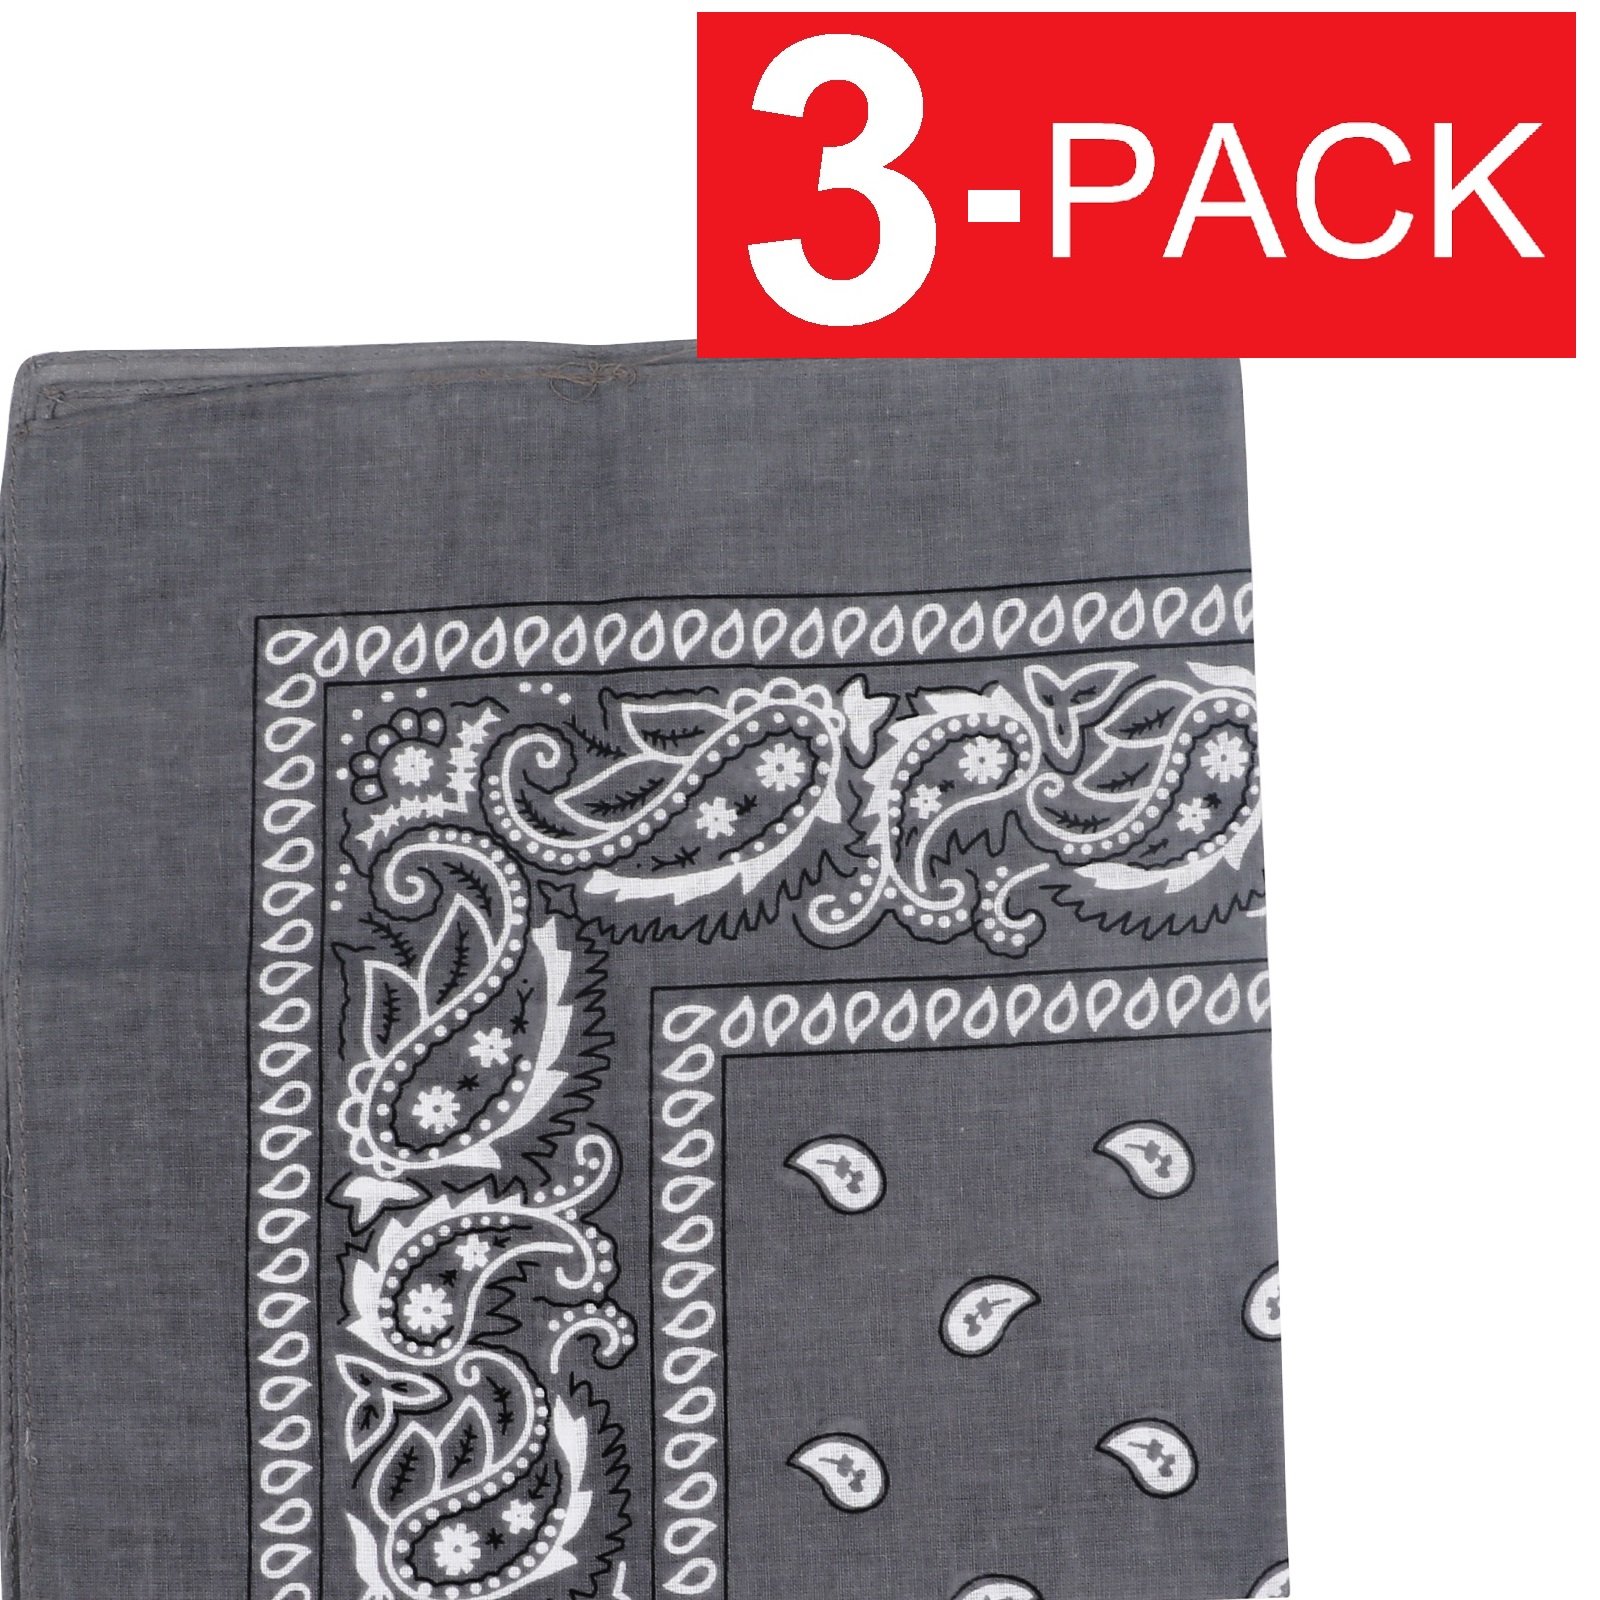 3-Pack Bandana 100% Cotton Paisley Print Double-Sided Scarf Head Neck Face Mask 